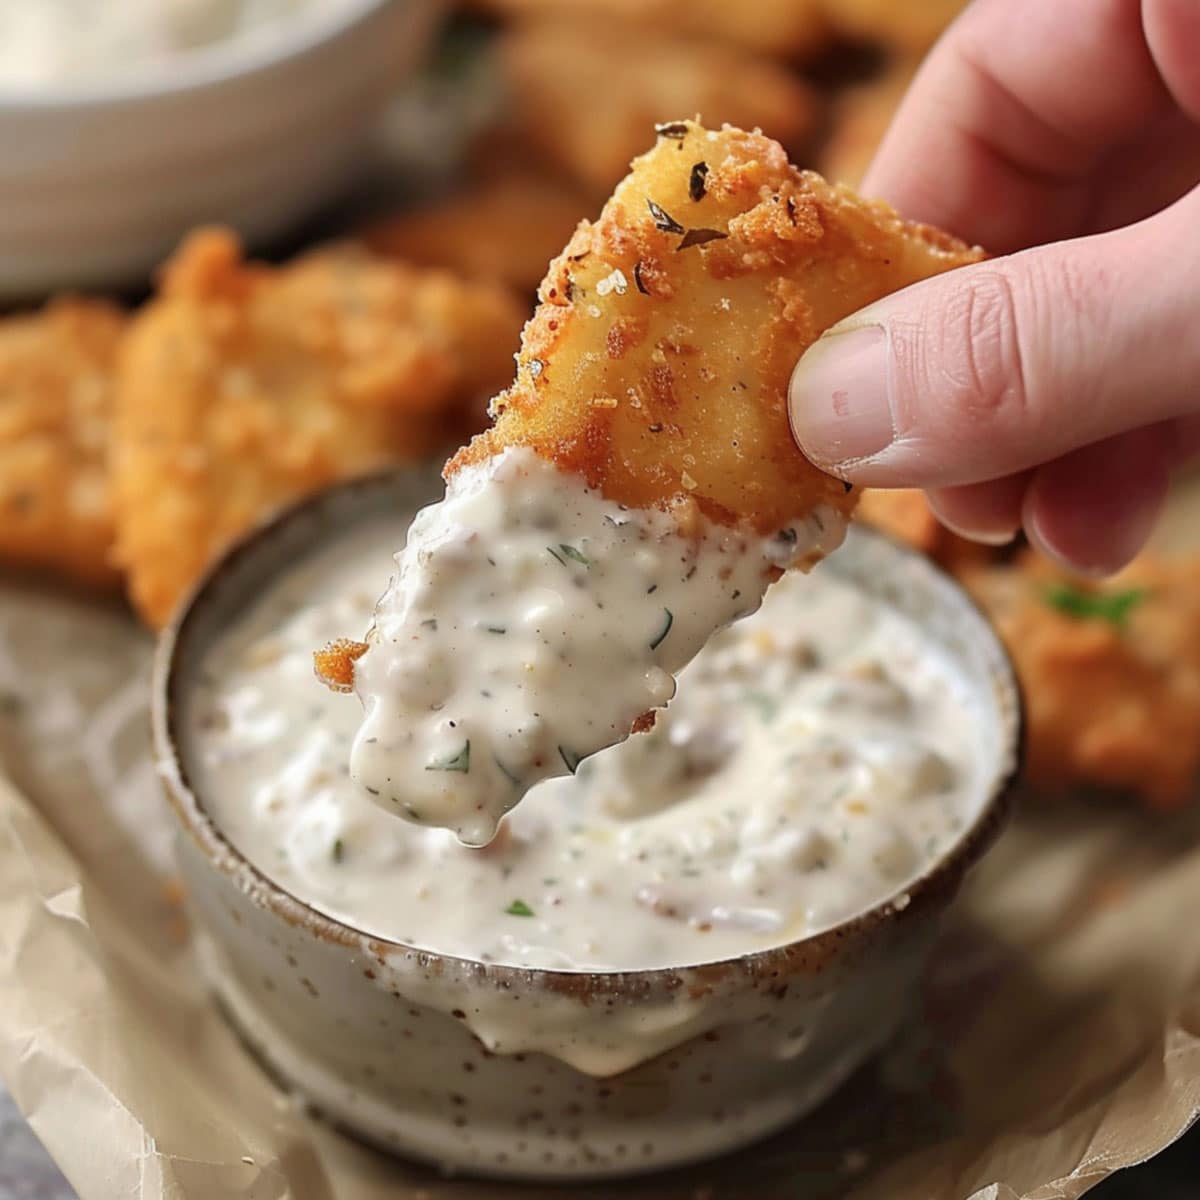 A bowl of fresh tartar sauce with herbs, perfect for seafood, burgers, and salads.